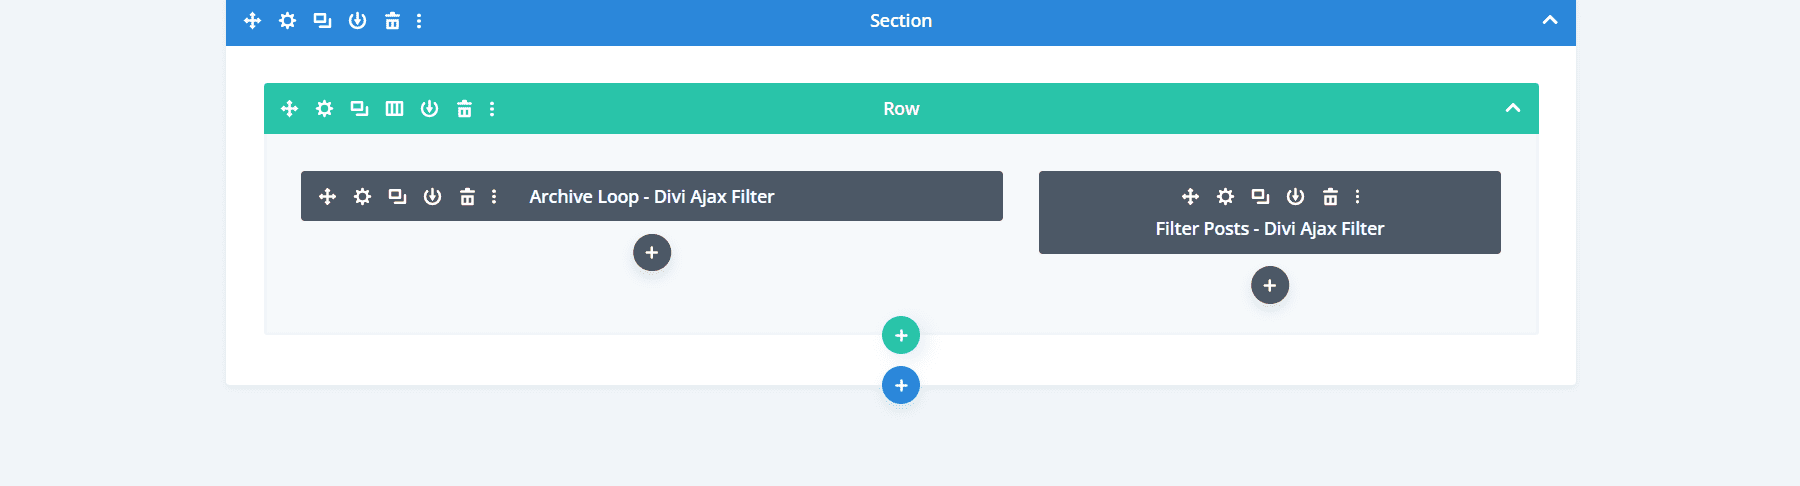 Building a Product Filter